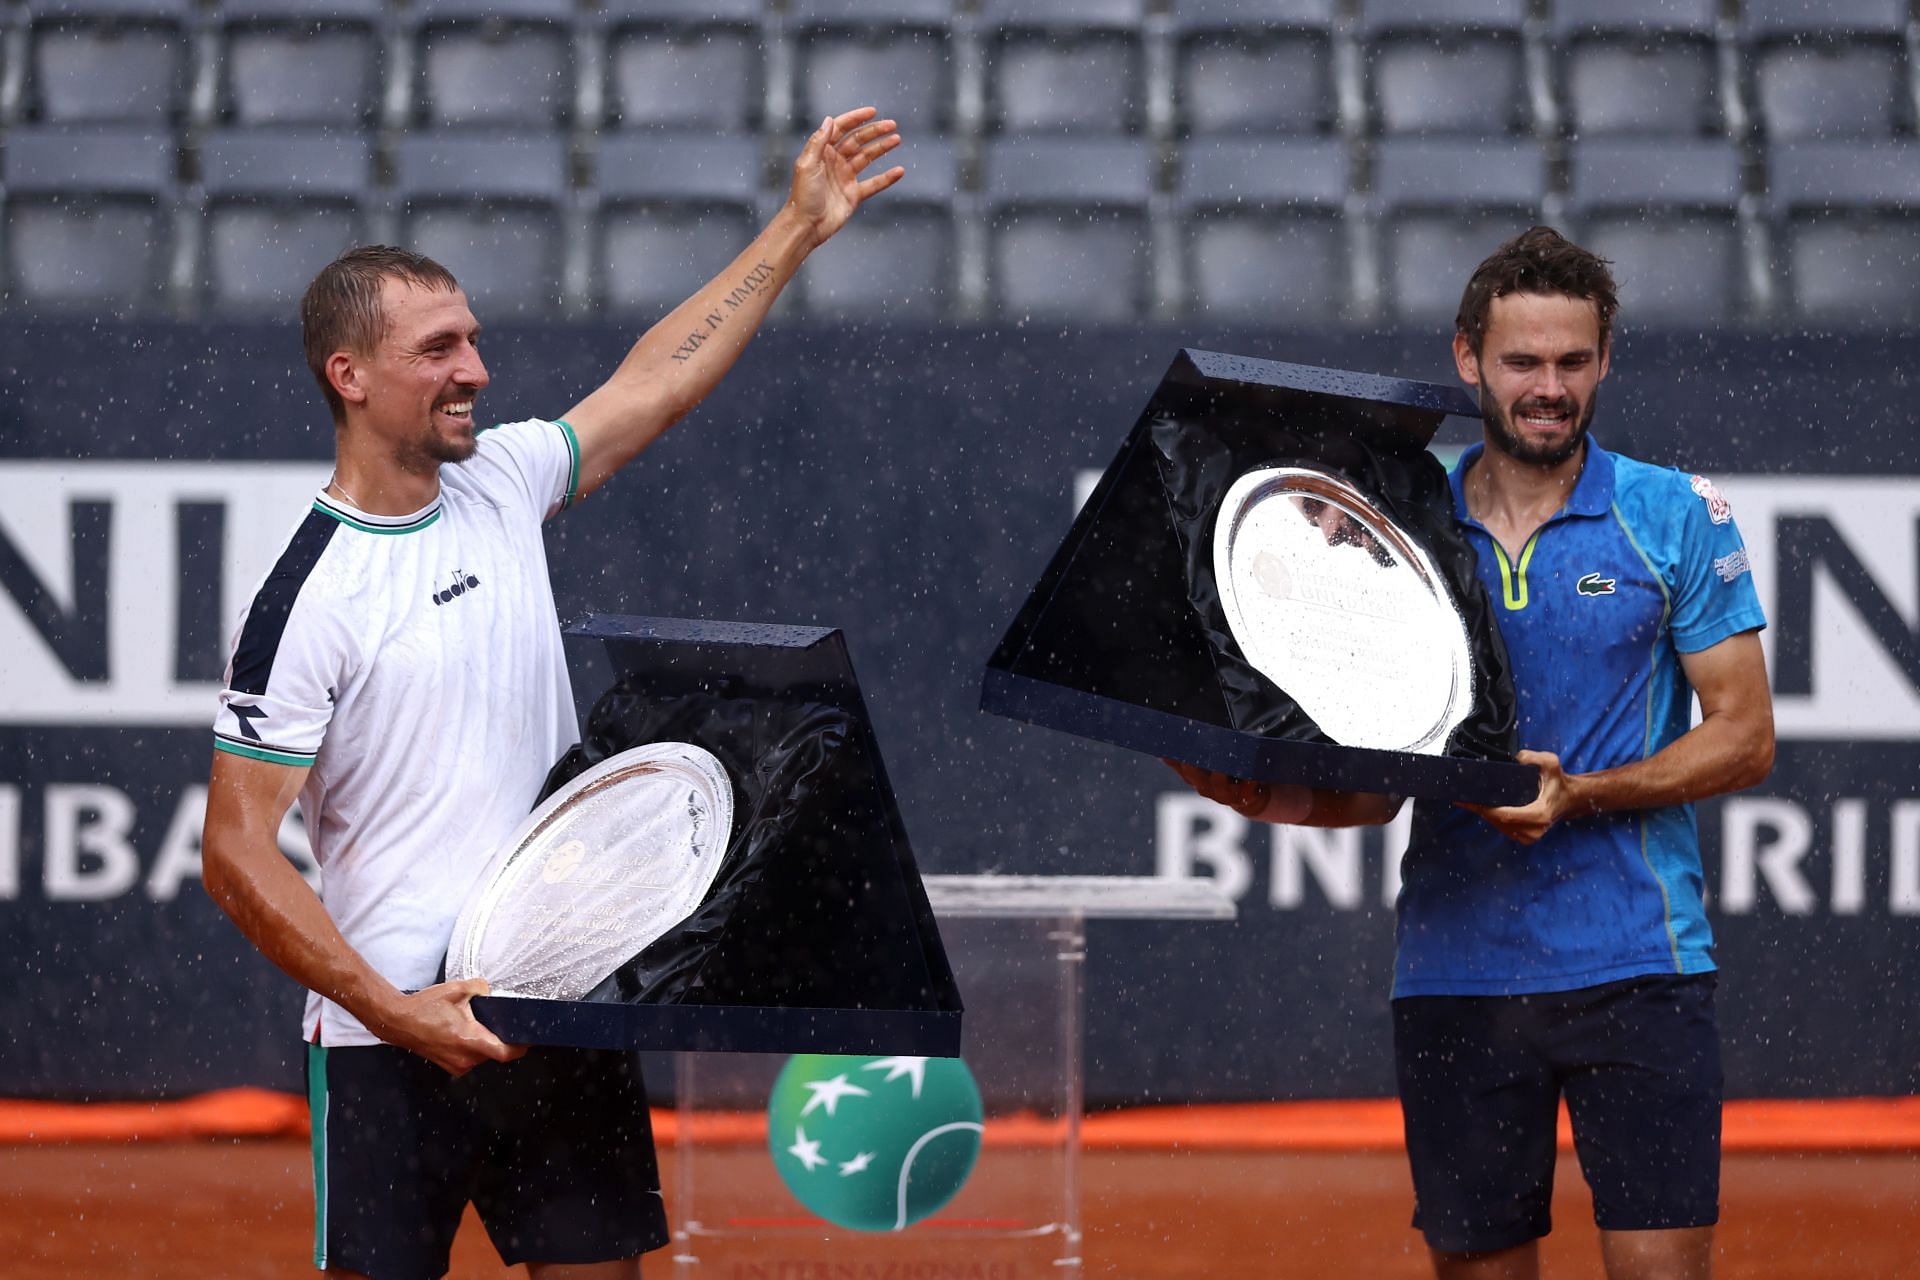 Hugo Nys and Jan Zielinski with their trophies in Rome